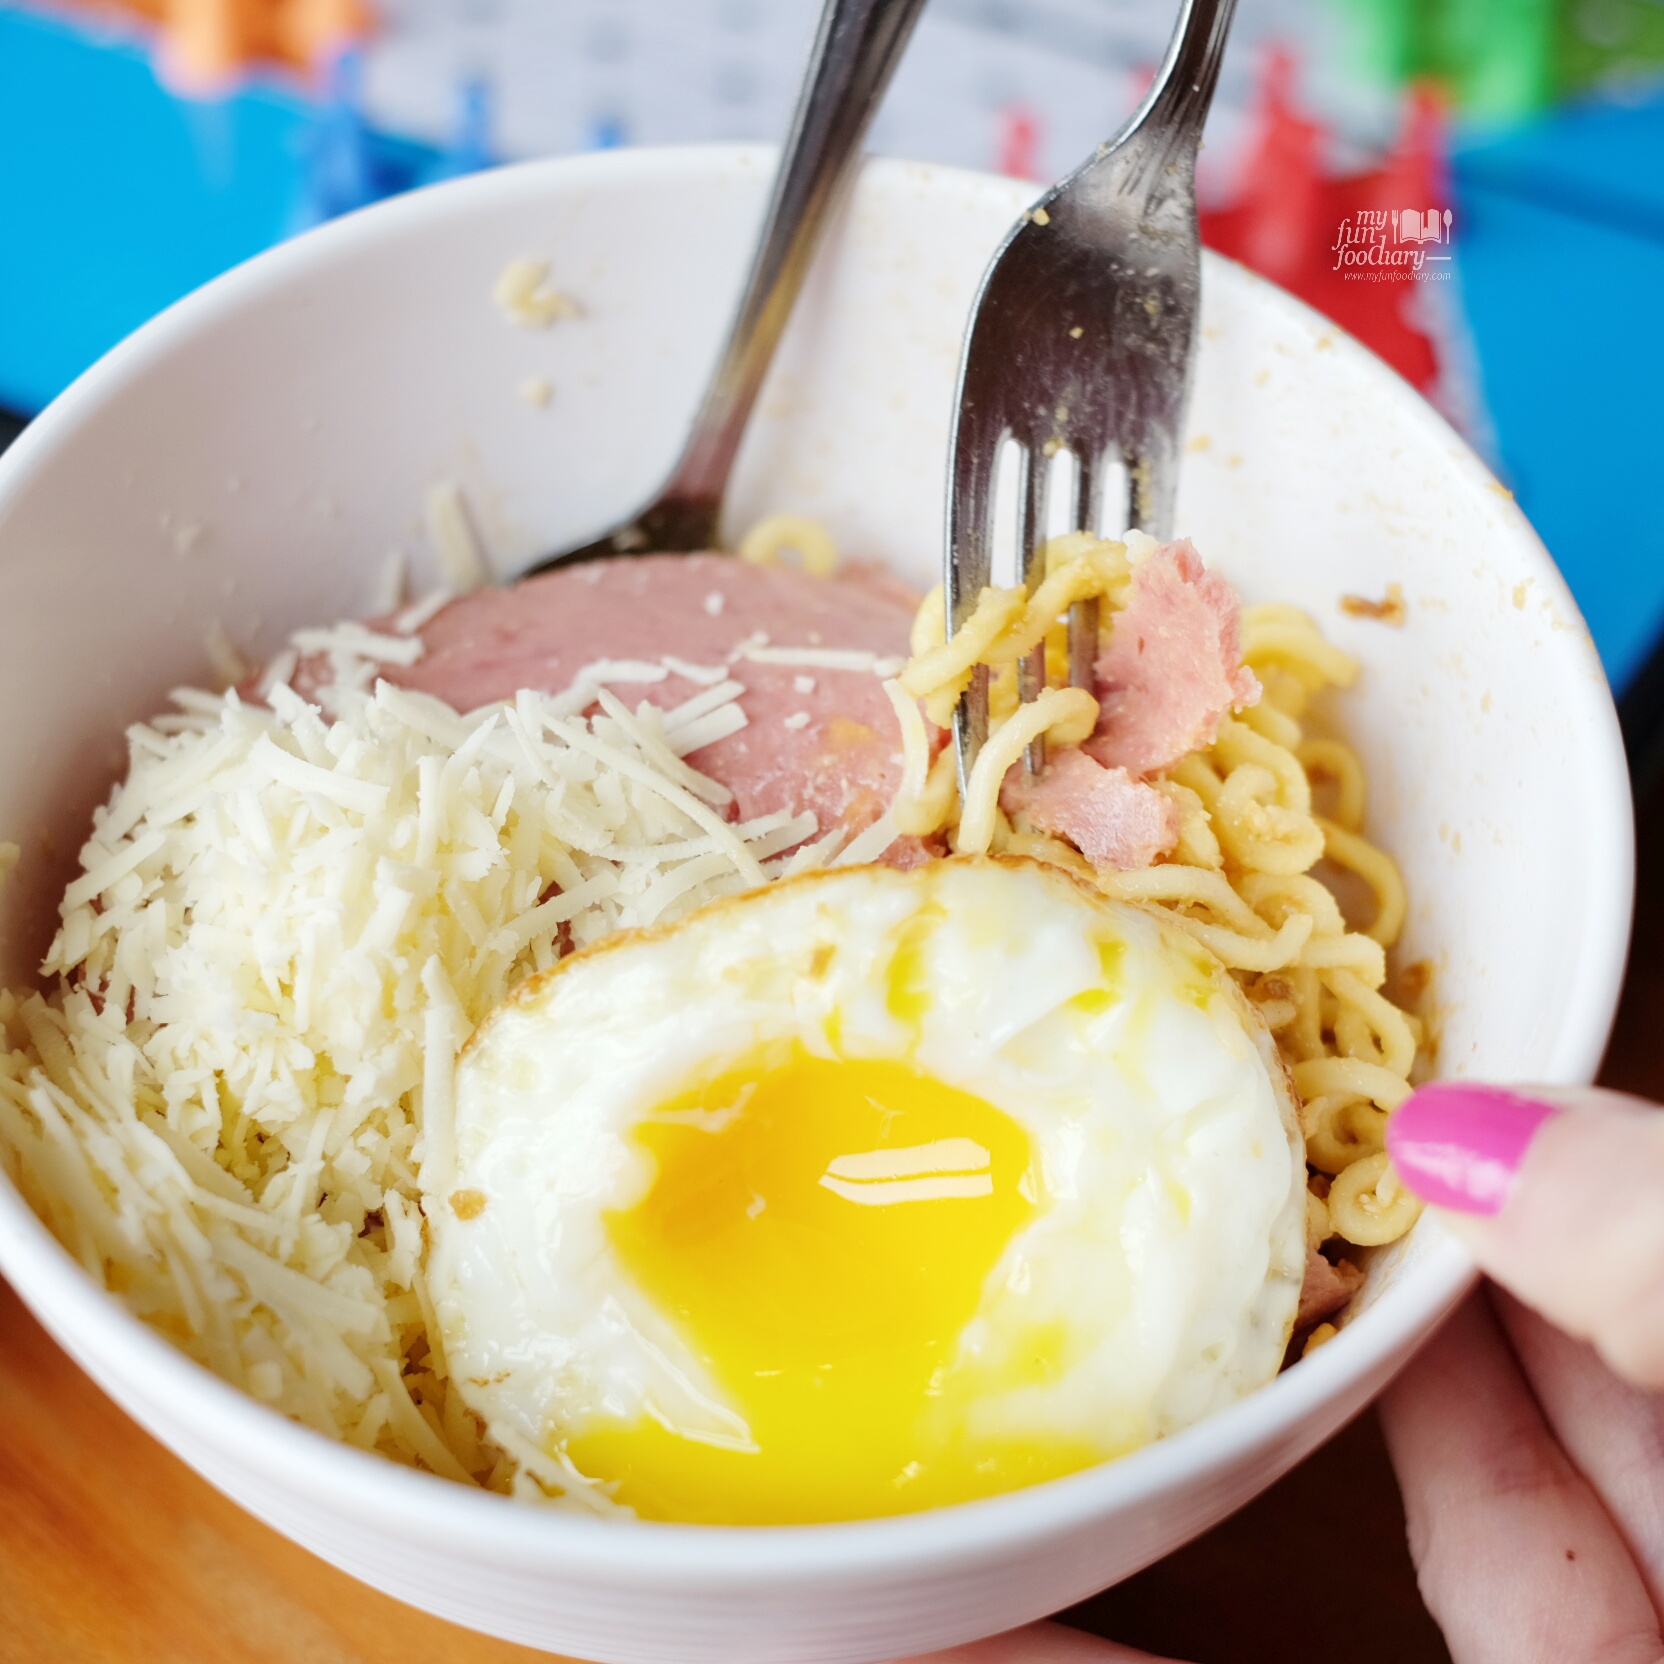 Indomie Telor Asin at Warunk Upnormal by Myfunfoodiary 01